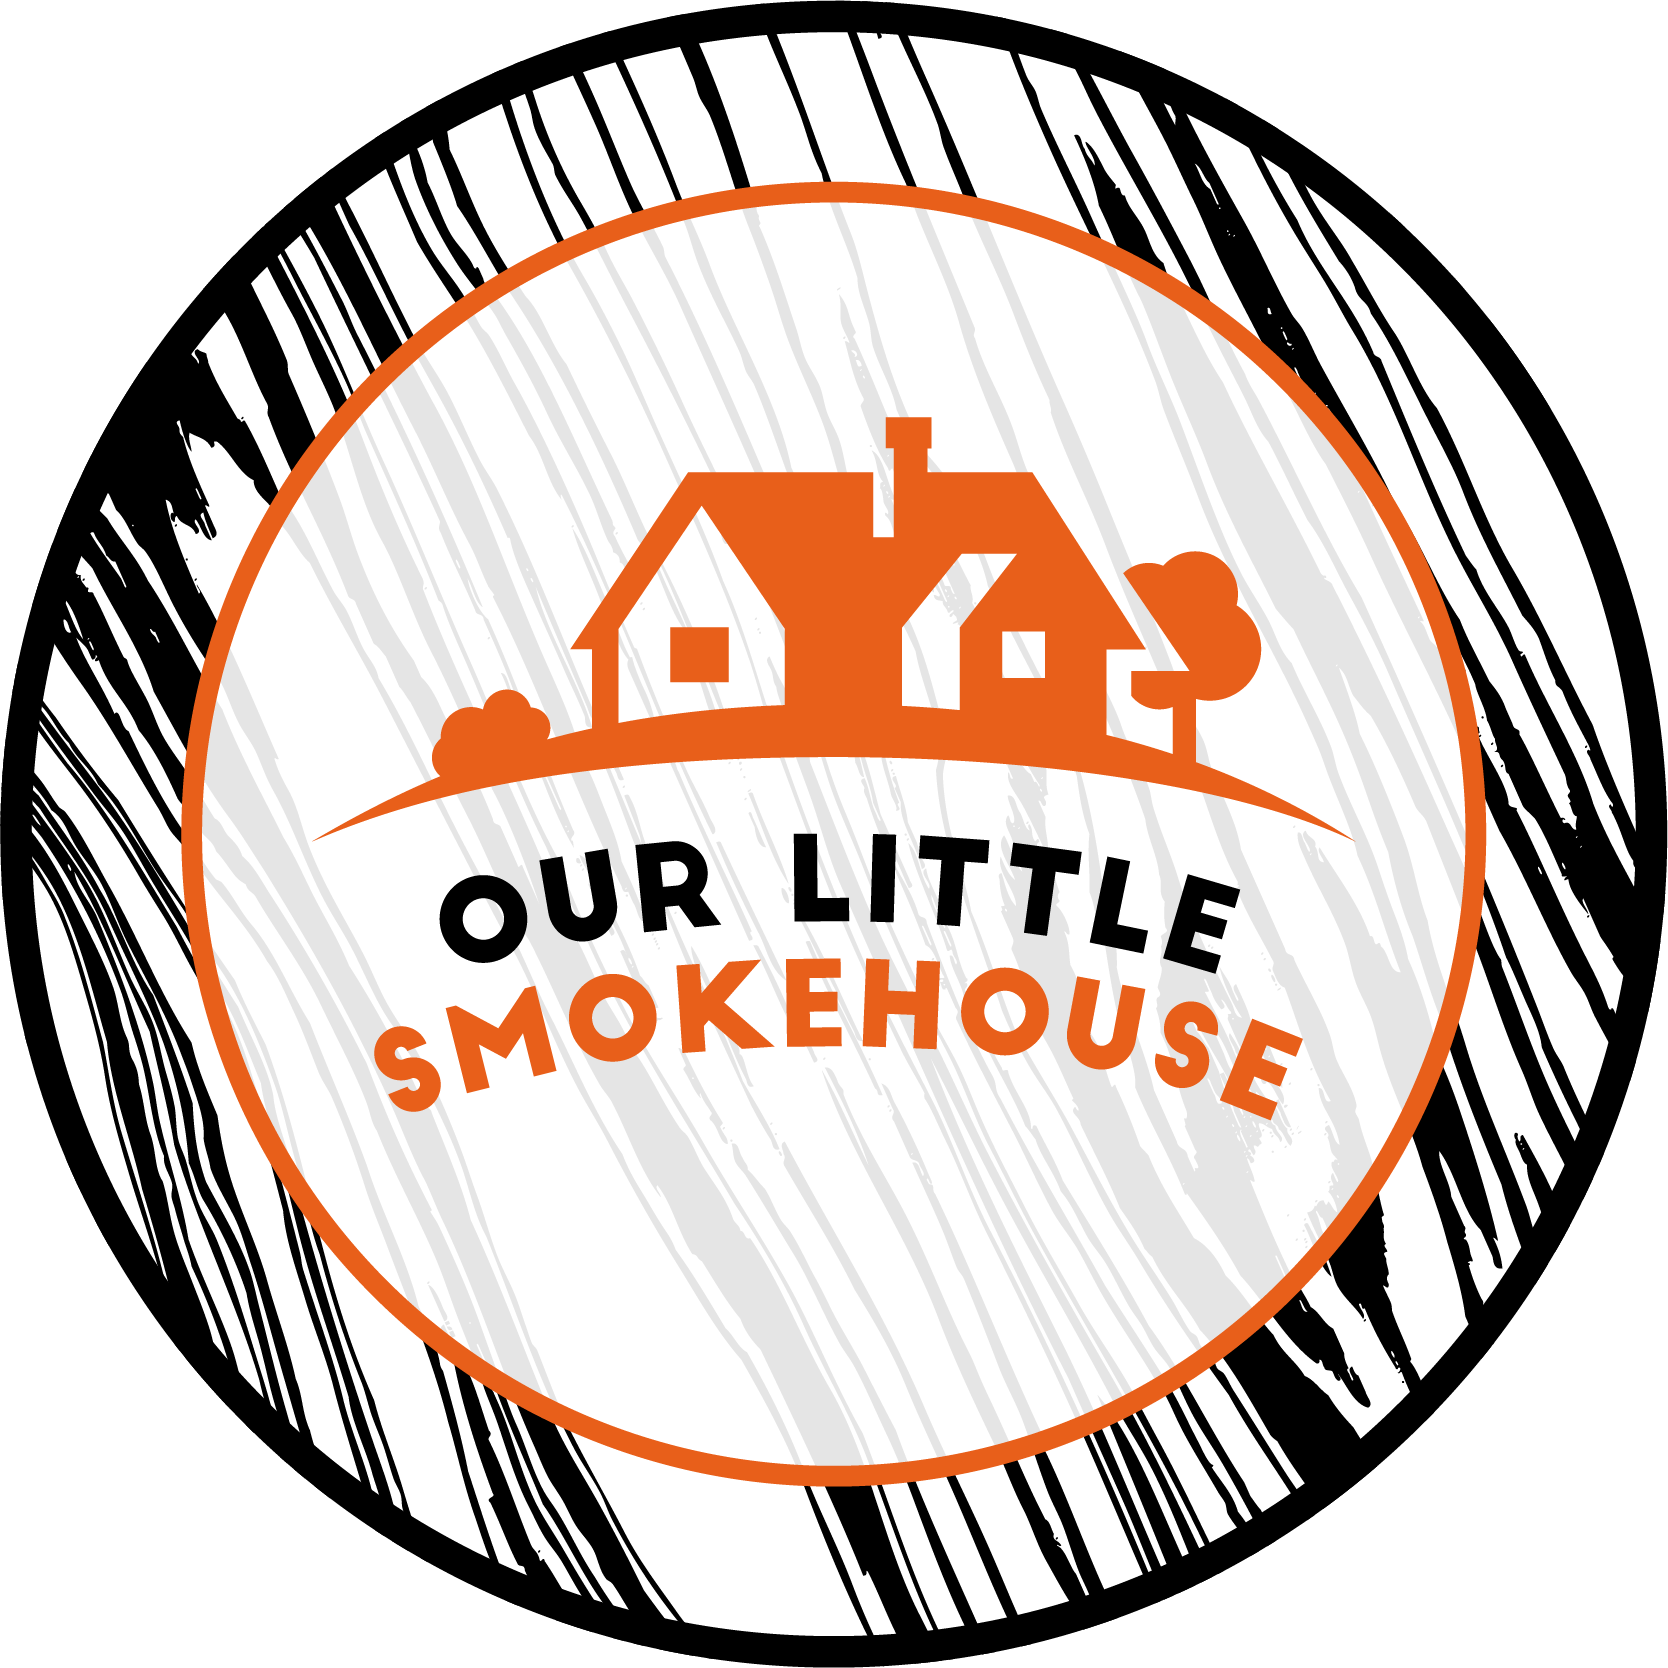 Our Little Smokehouse